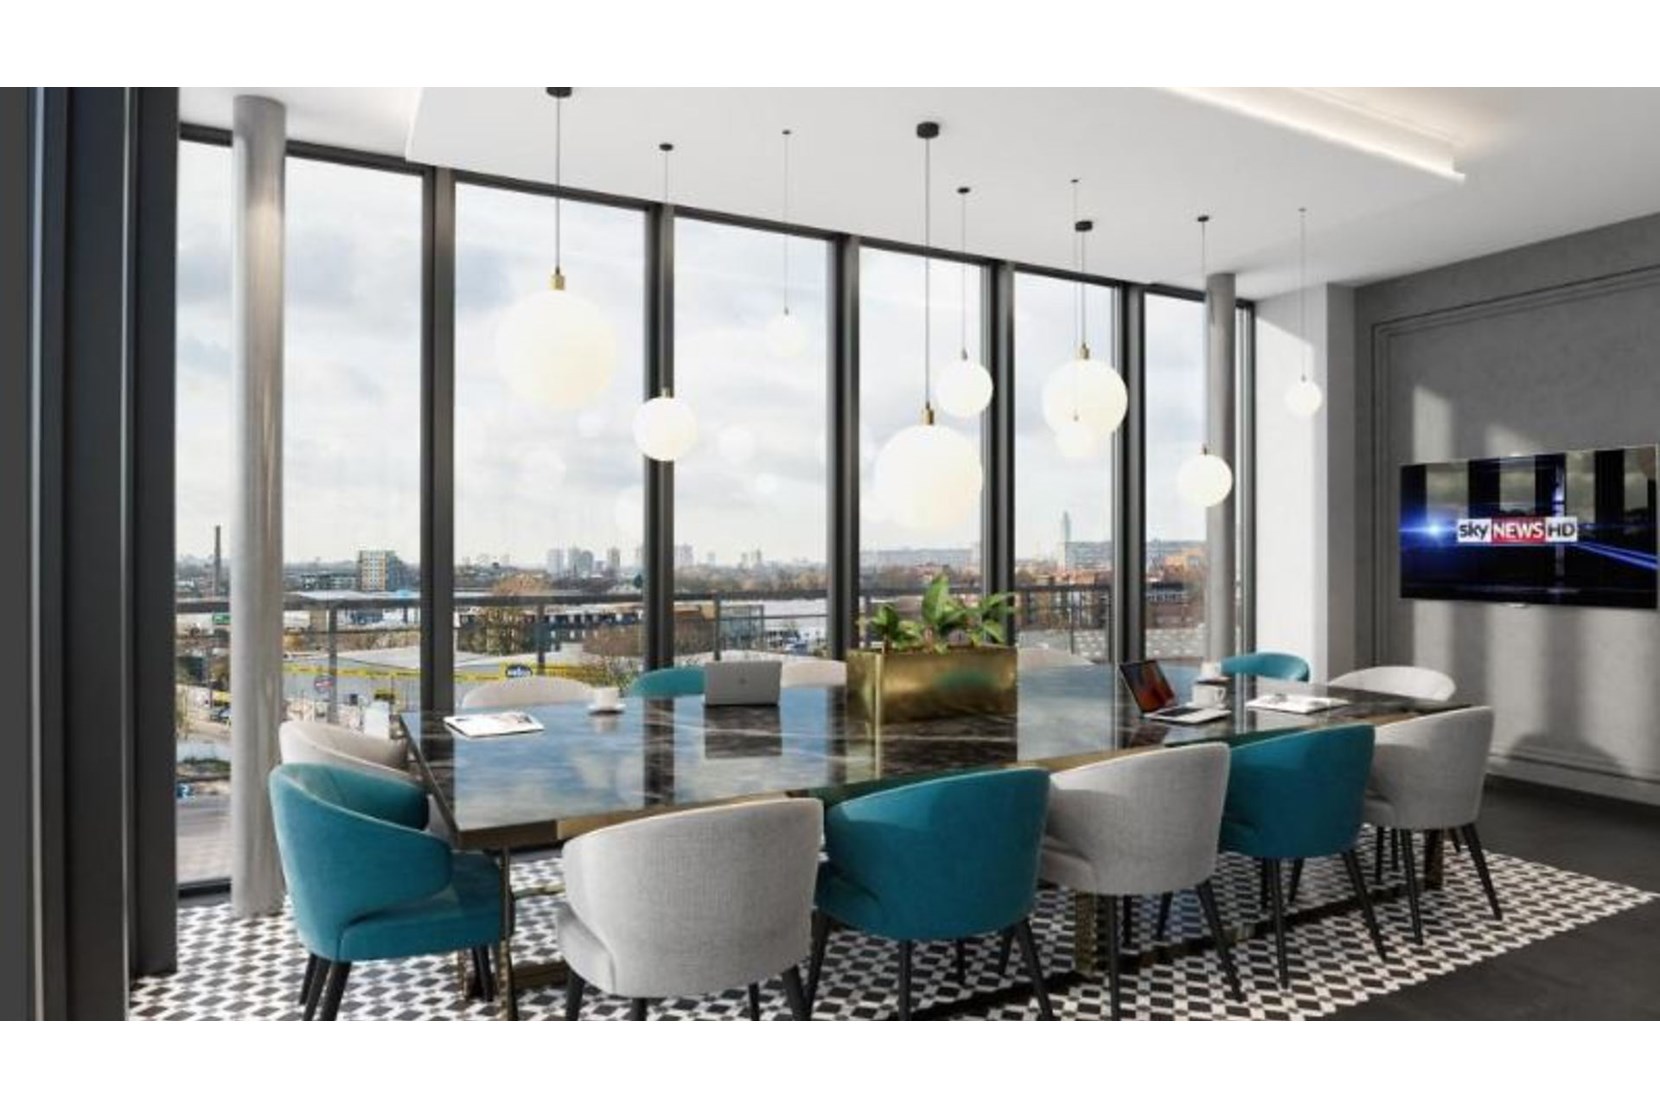 Apartments to Rent by Savills at The Highline, Tower Hamlets, E14, private dining